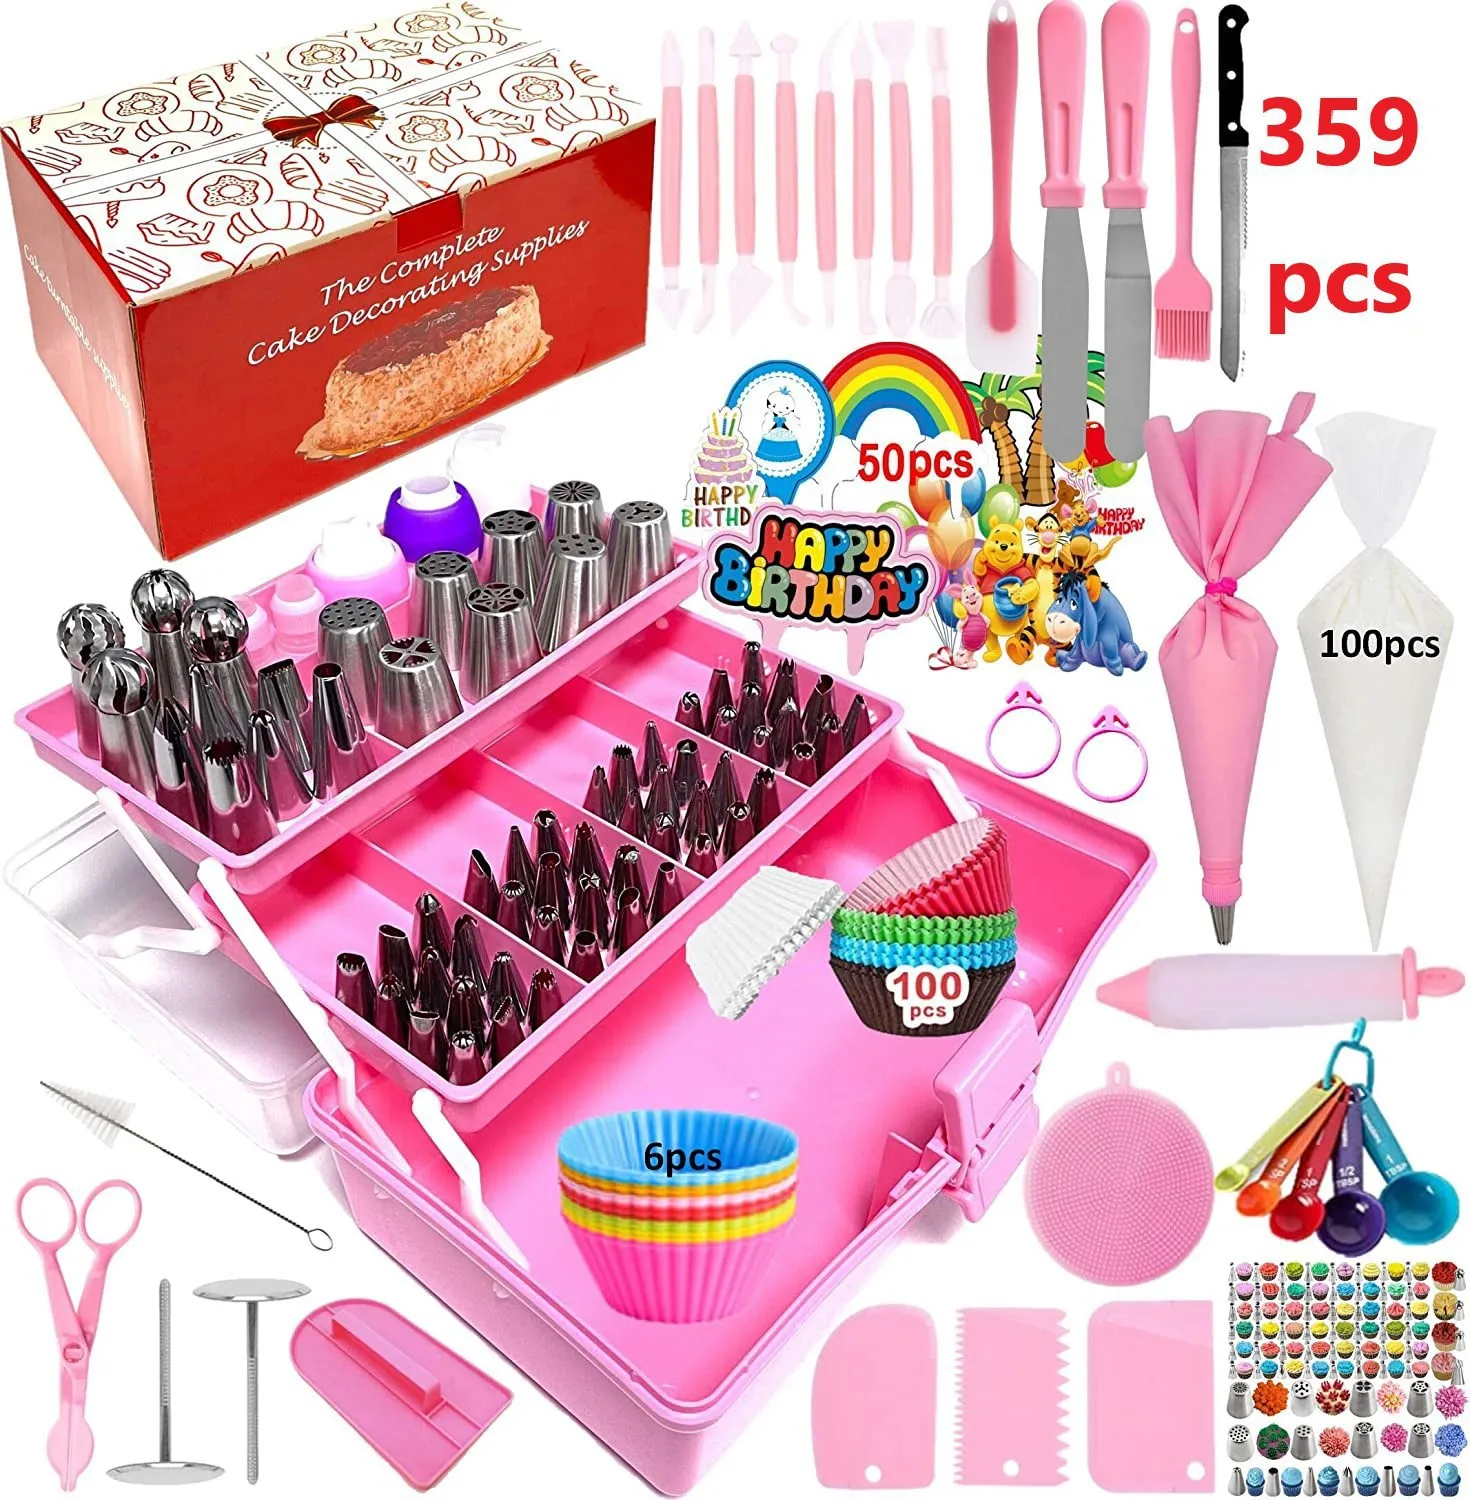 cake tools and accessories bakeware set Cake turntable decoration nozzle set DIY kitchen bakery baking tools cake tools